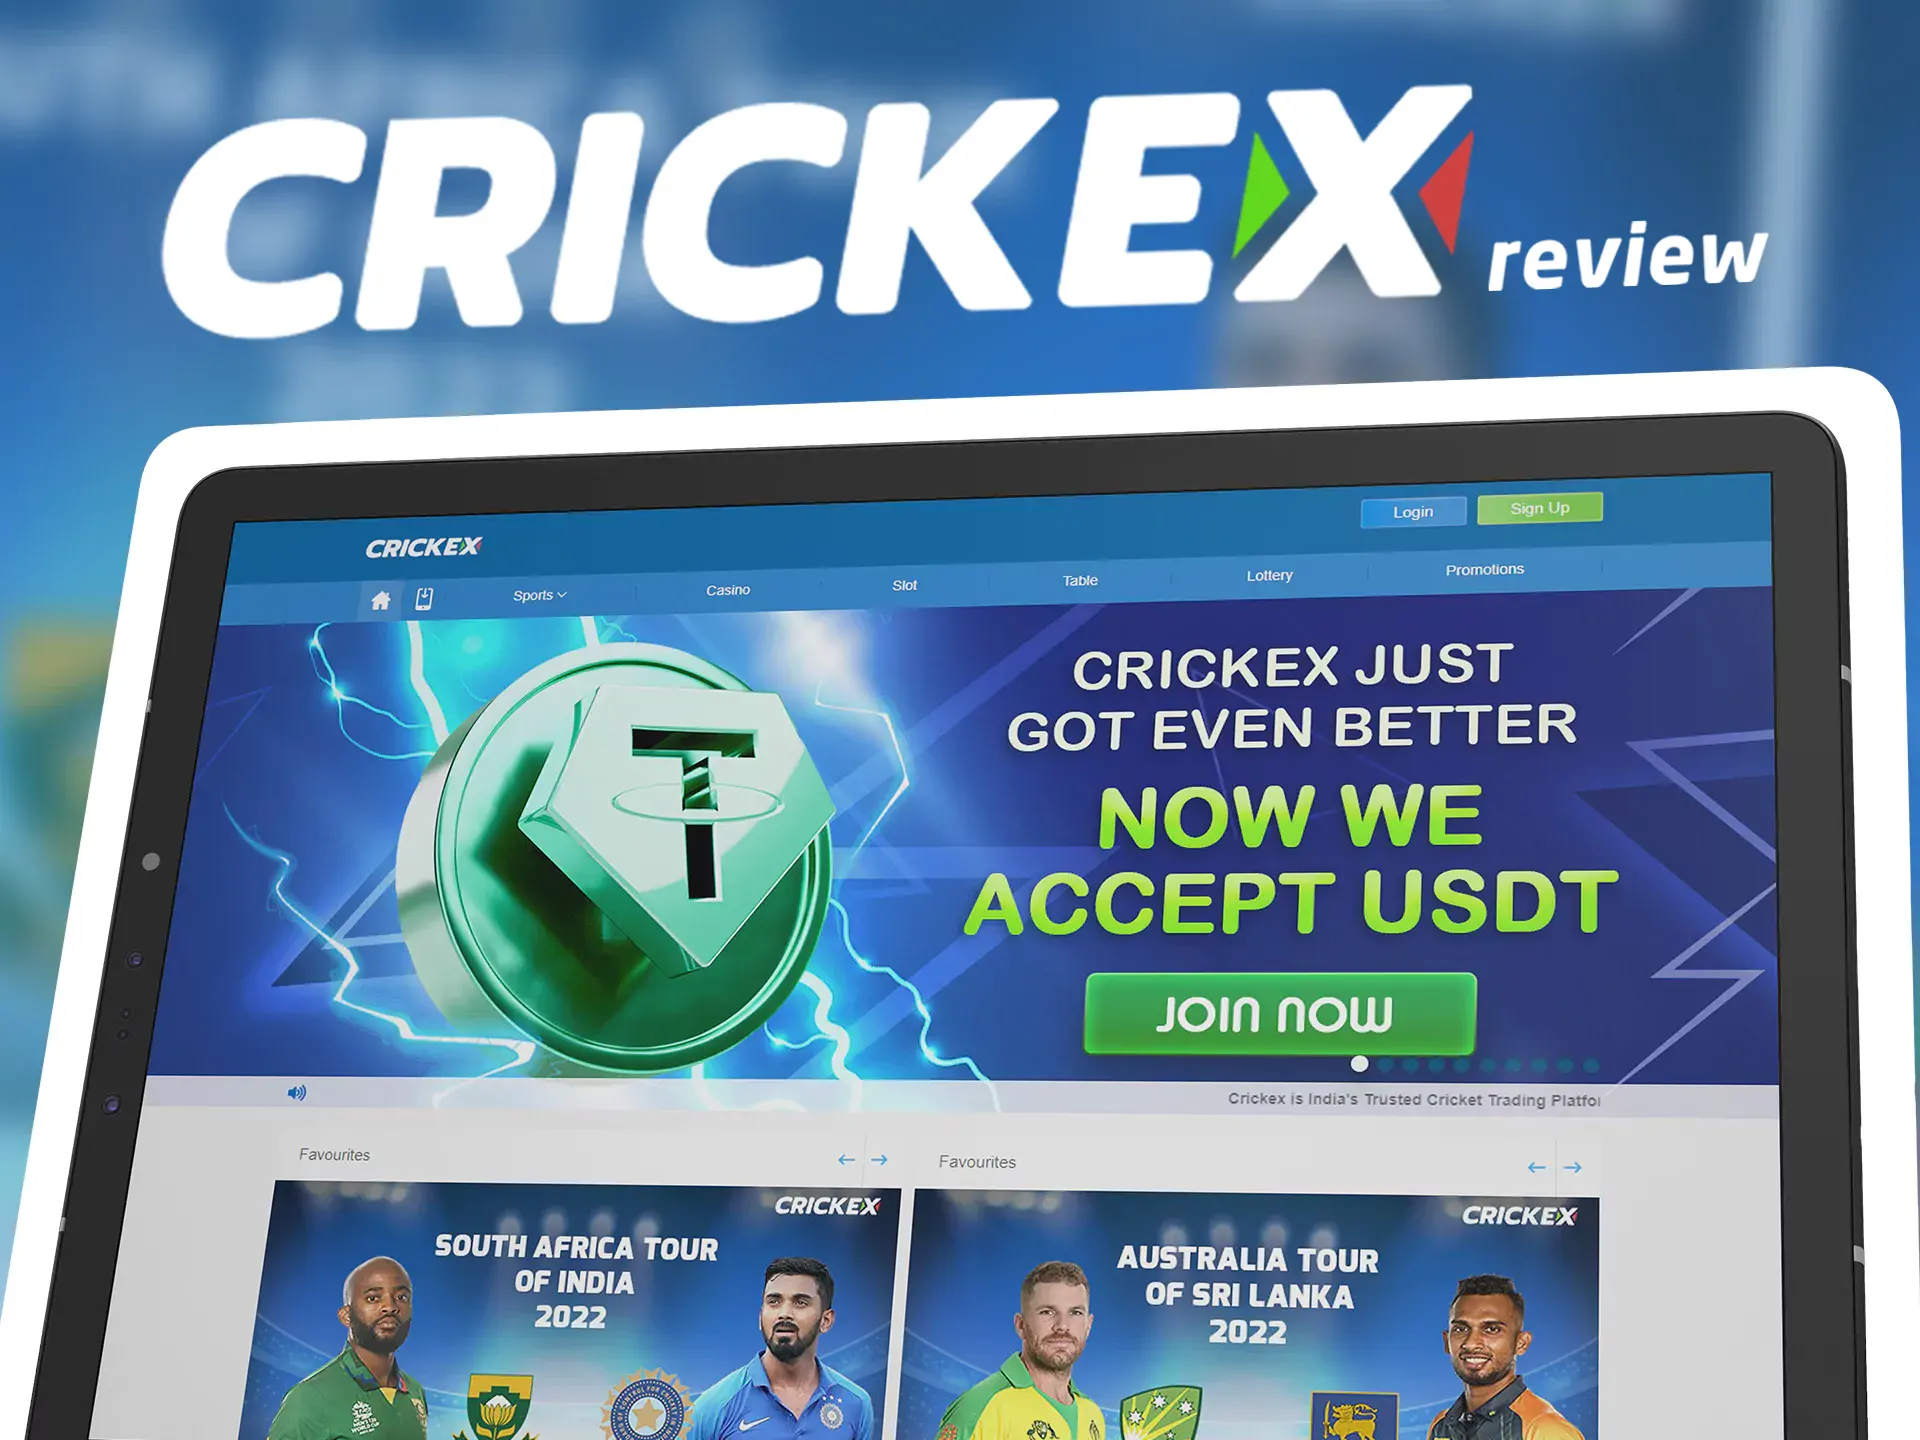 The mobile version of the Crickex website is available for all smartphones.